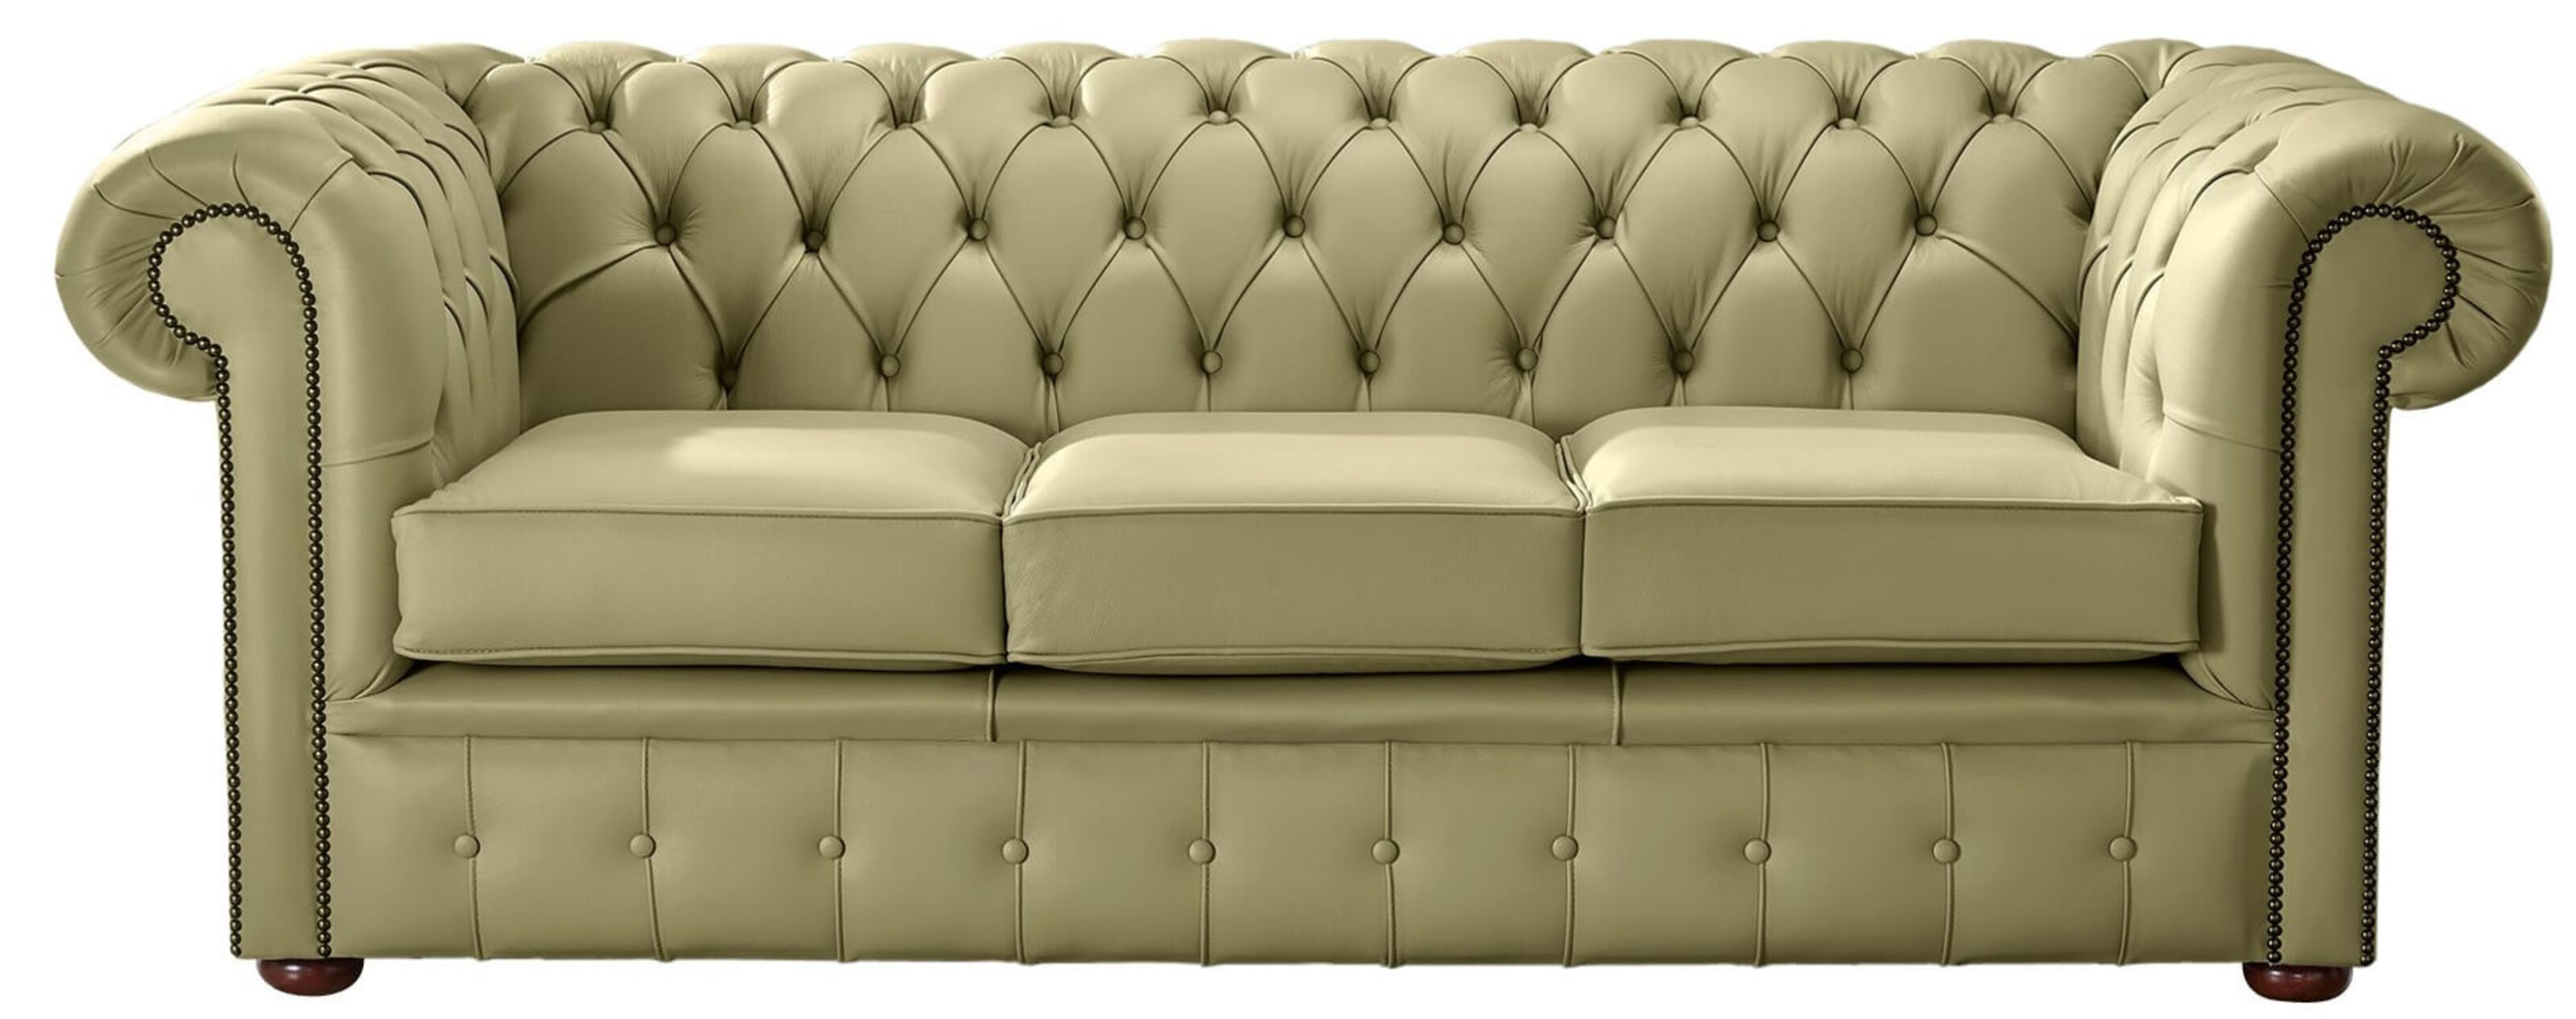 The Chesterfield Iconic Seating for Every Space  %Post Title